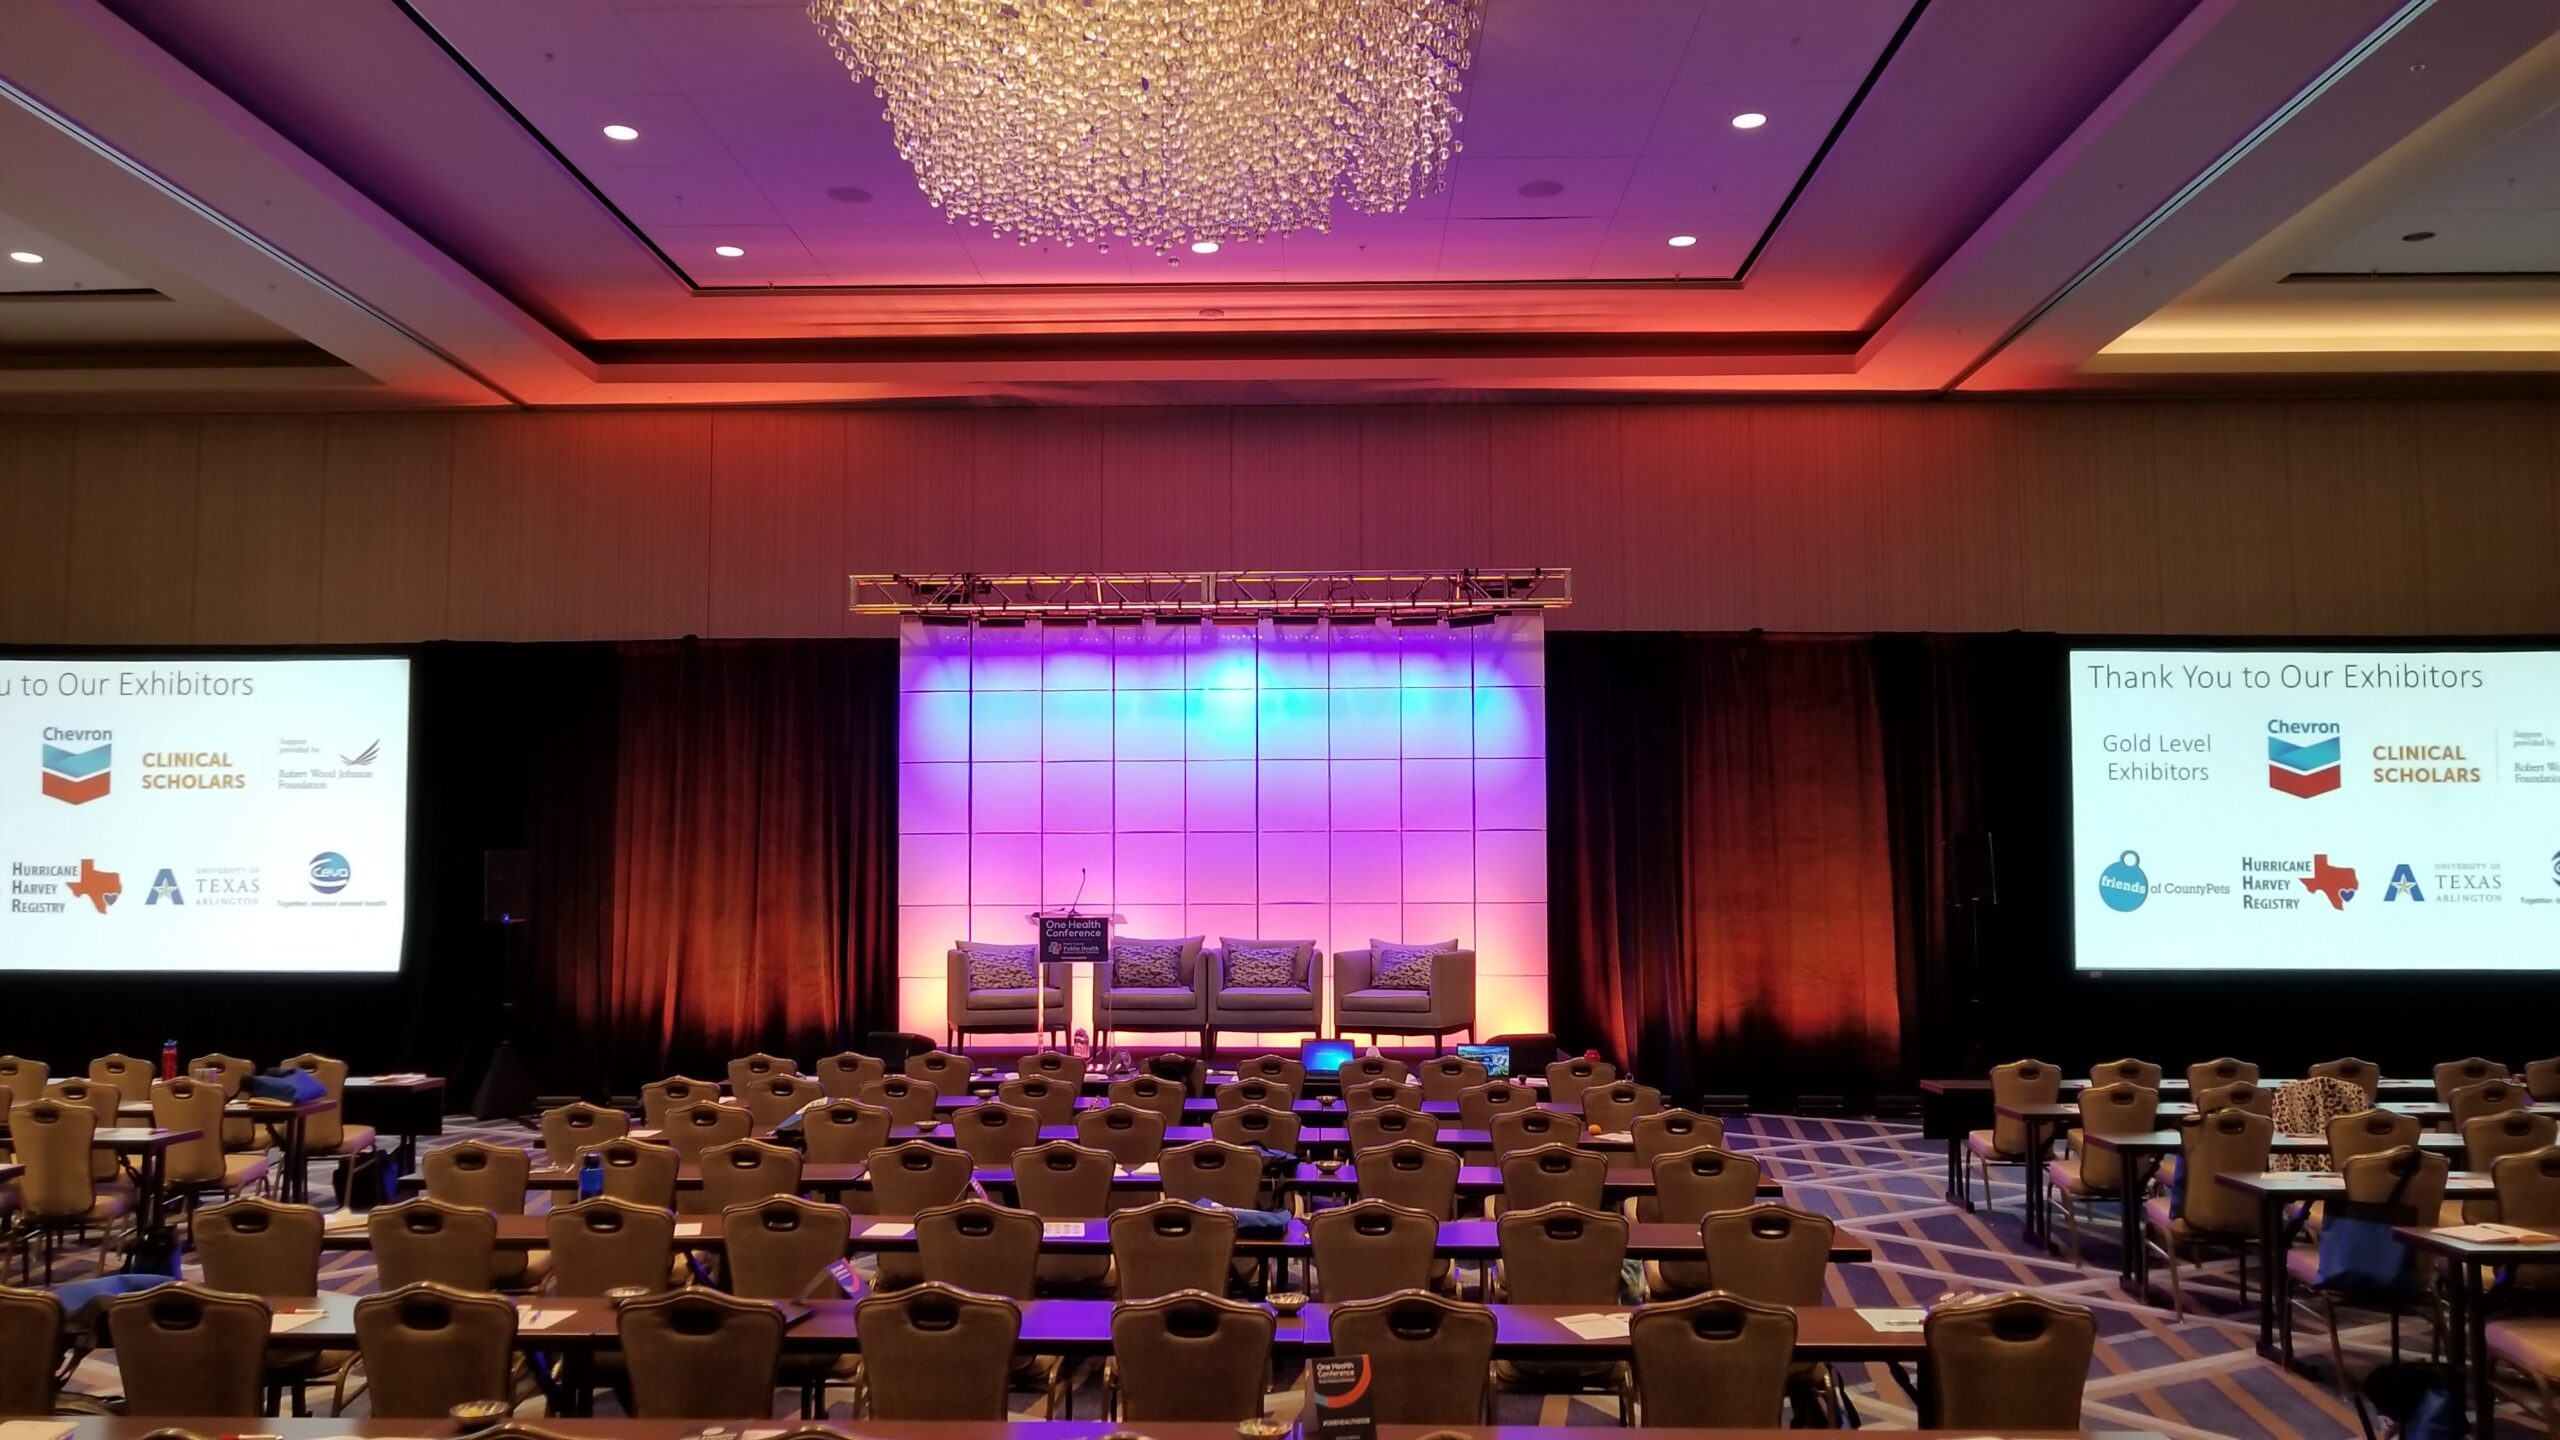 Meetings & Conferences Stage Lighting